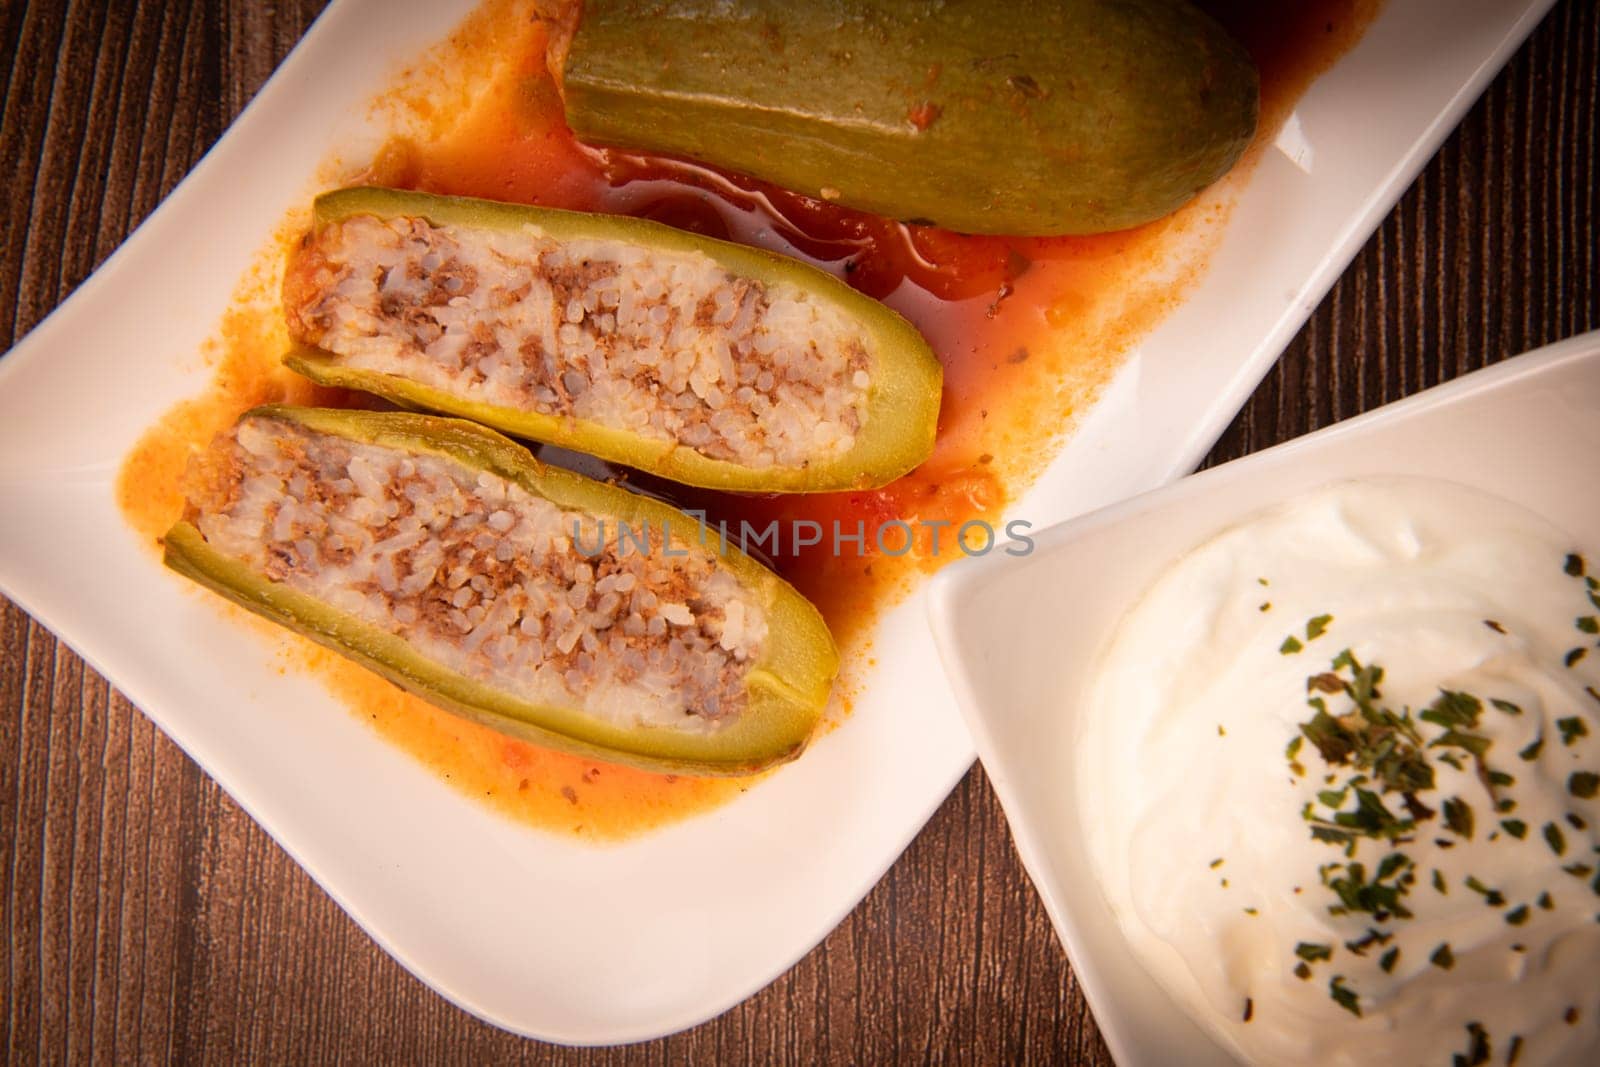 RECIPE FOR LEBANESE-STYLE MINI ZUCCHINI STUFFED WITH RICE AND BEEF IN A TOMATO SAUCE, High quality photo